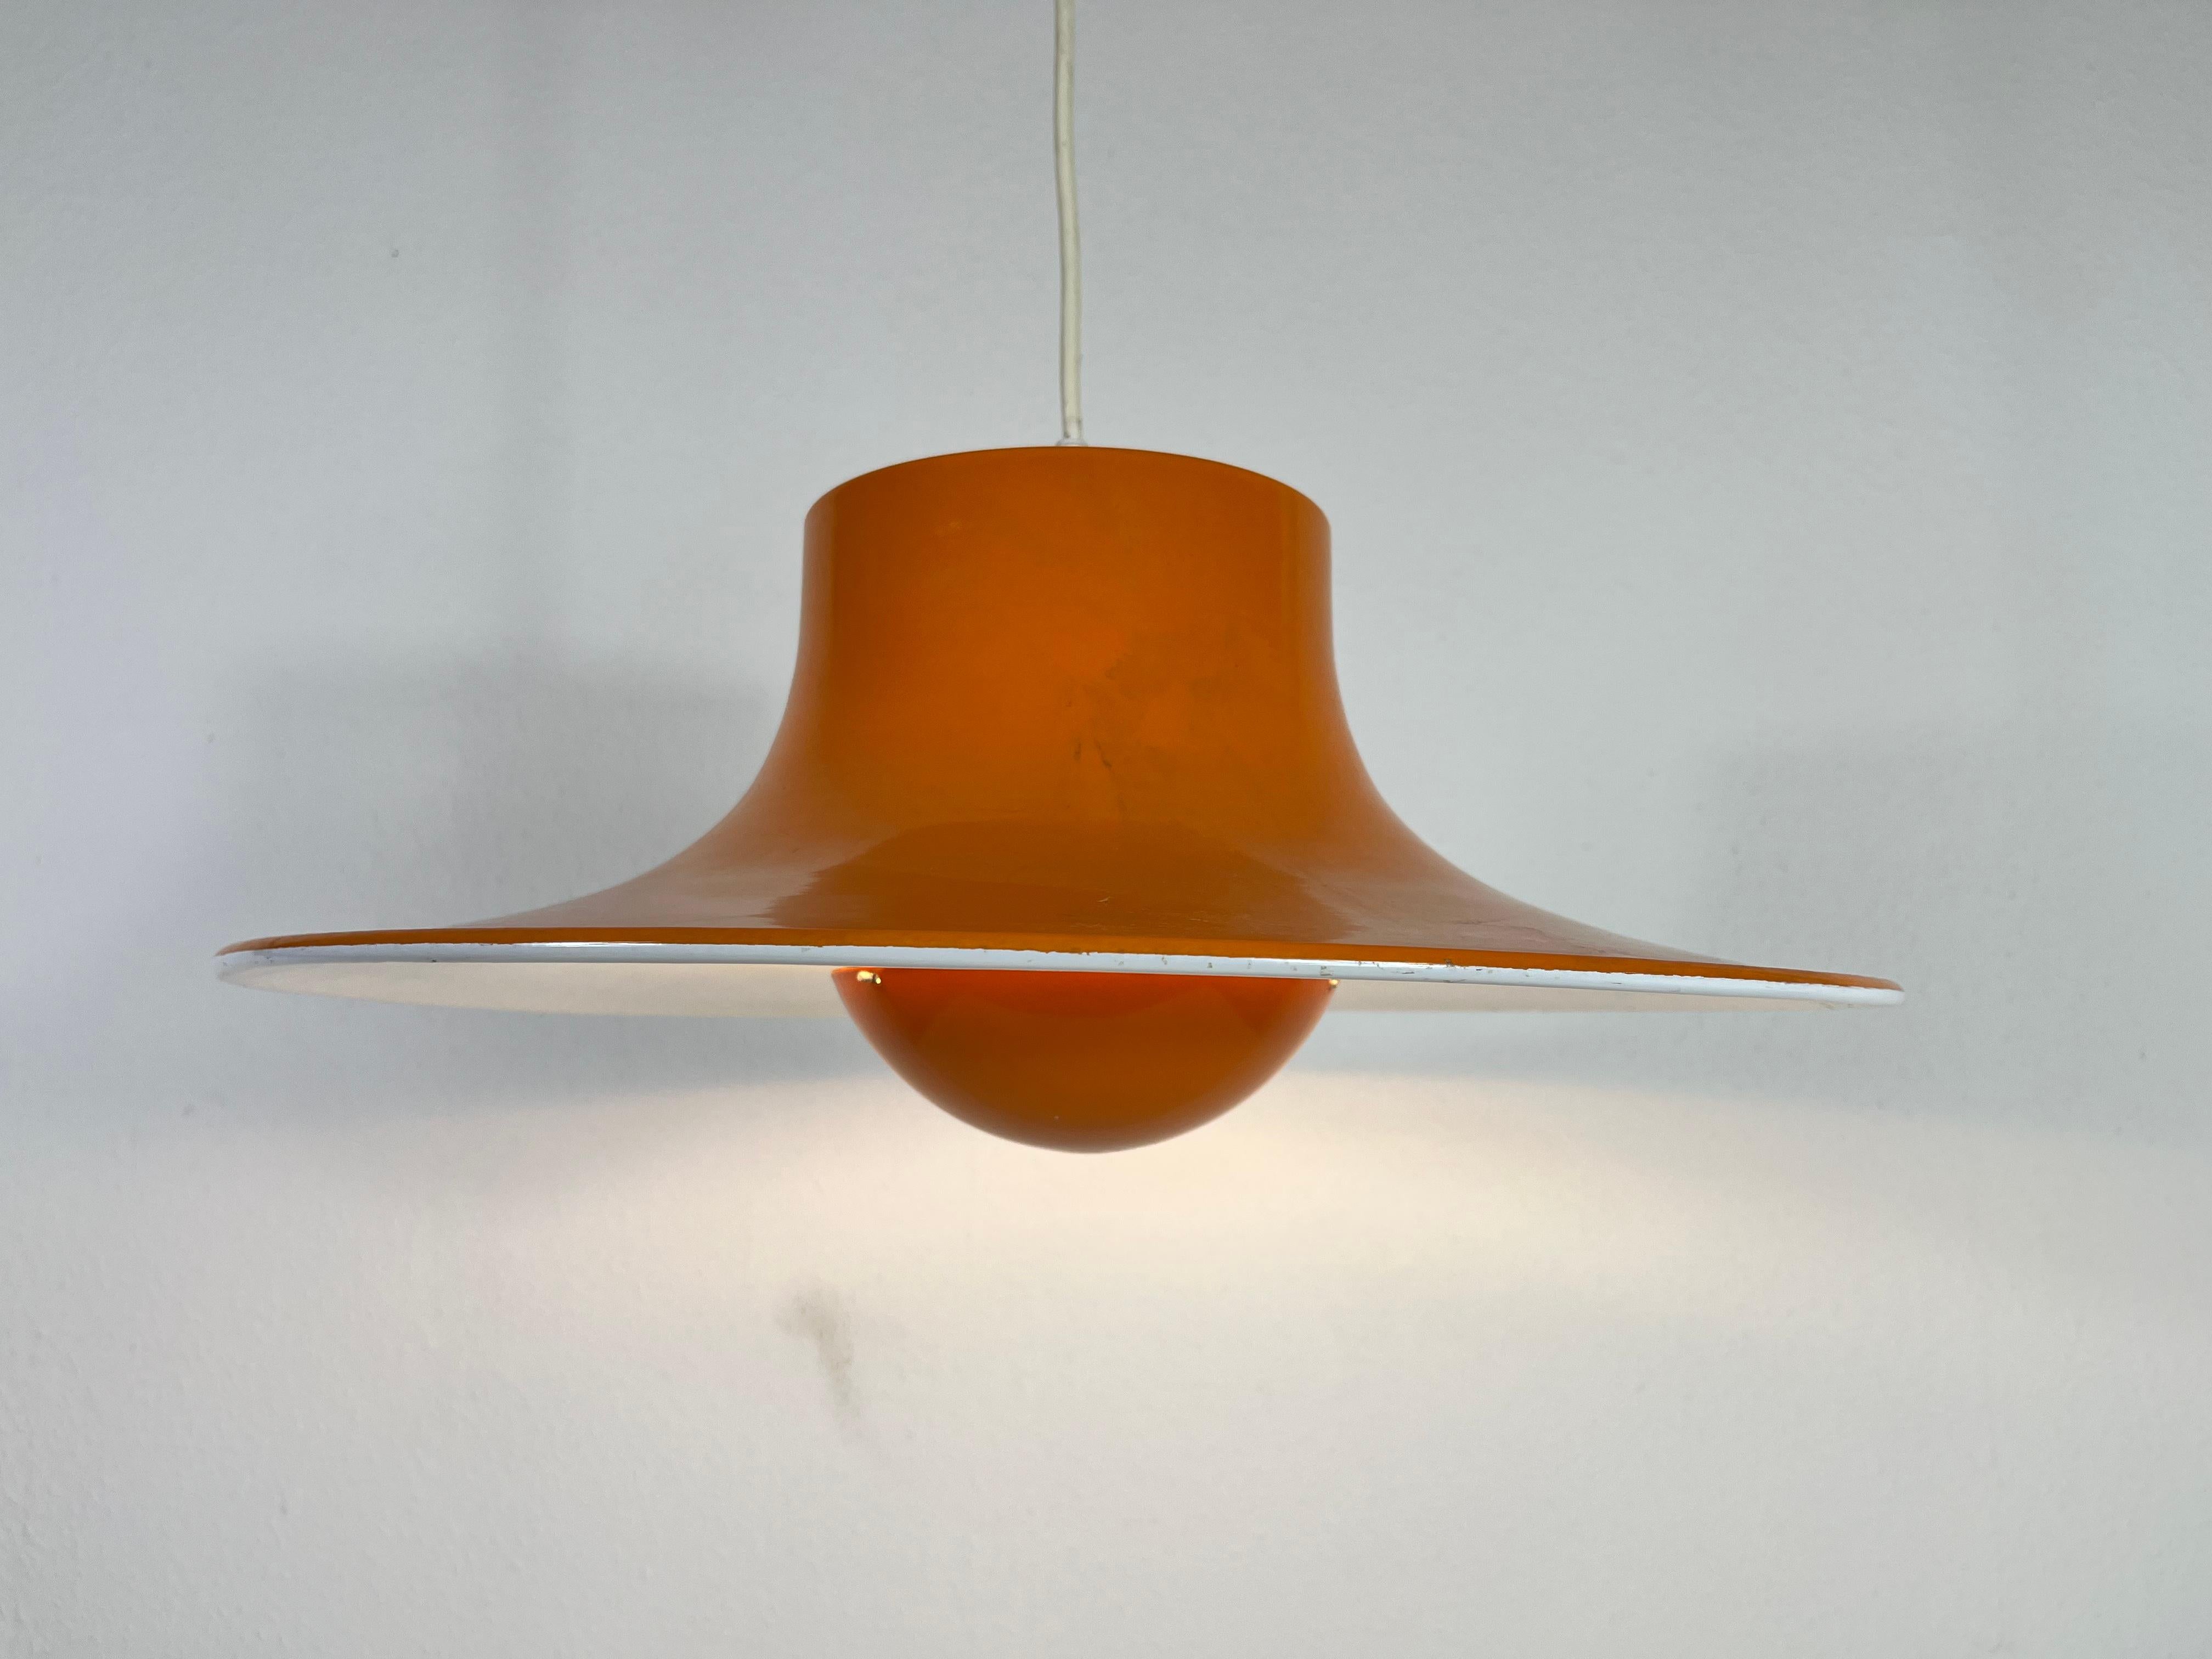 Space Age Orange Pendant Lamp by Erco, Germany, 1970s For Sale 3